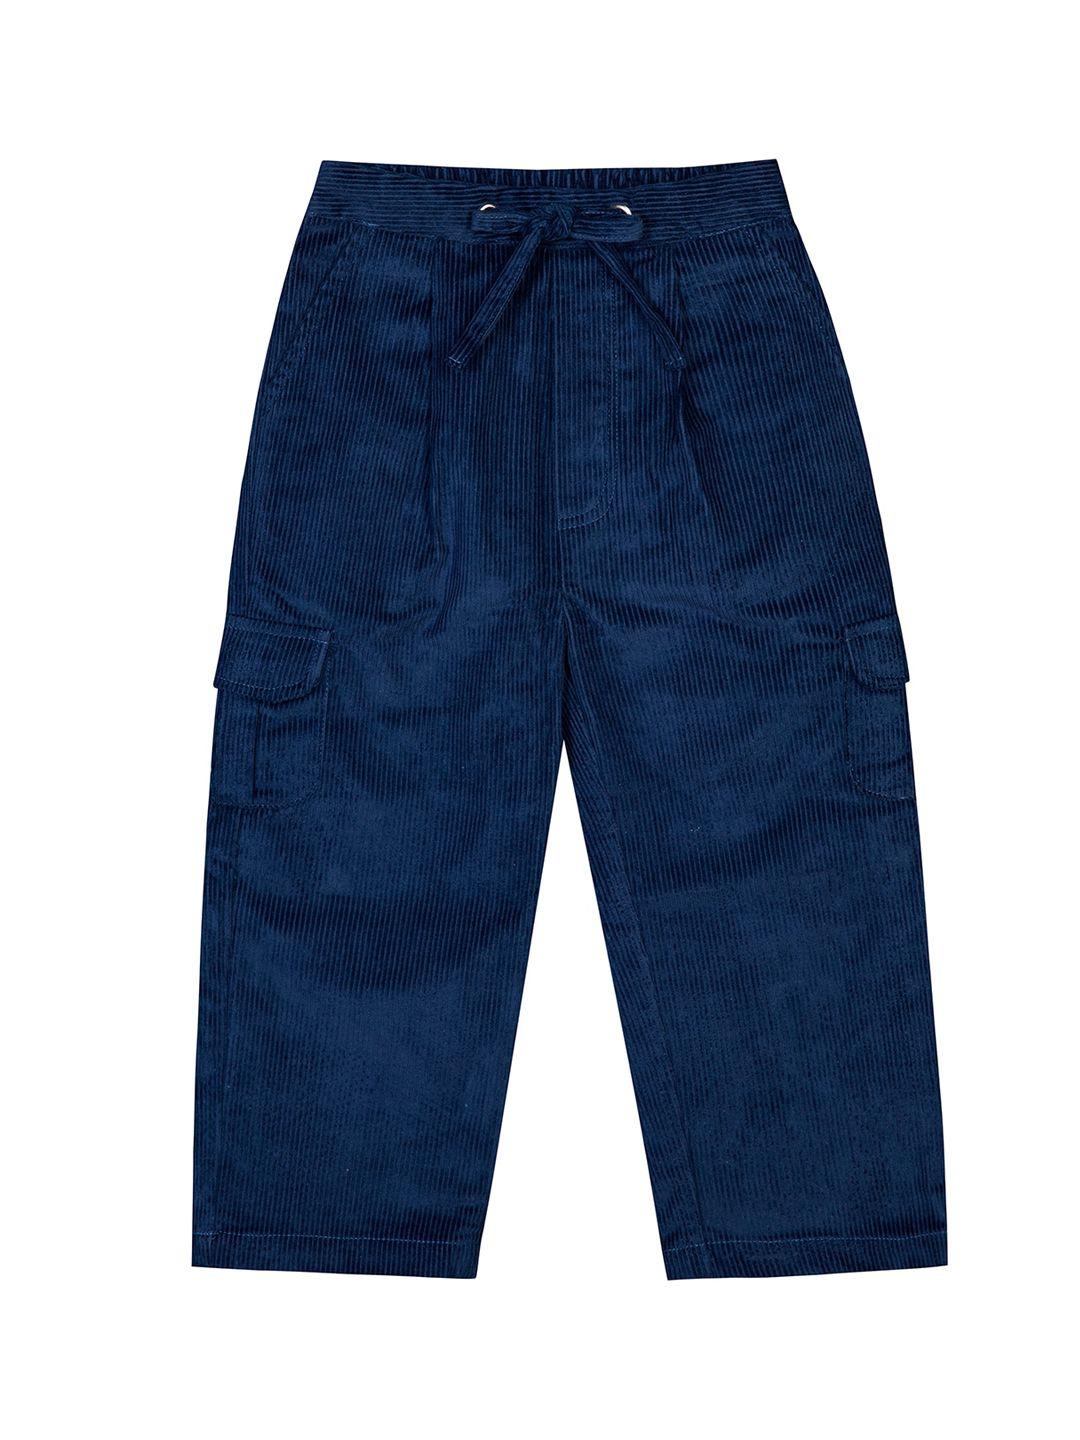 budding bees boys blue relaxed cargos trousers